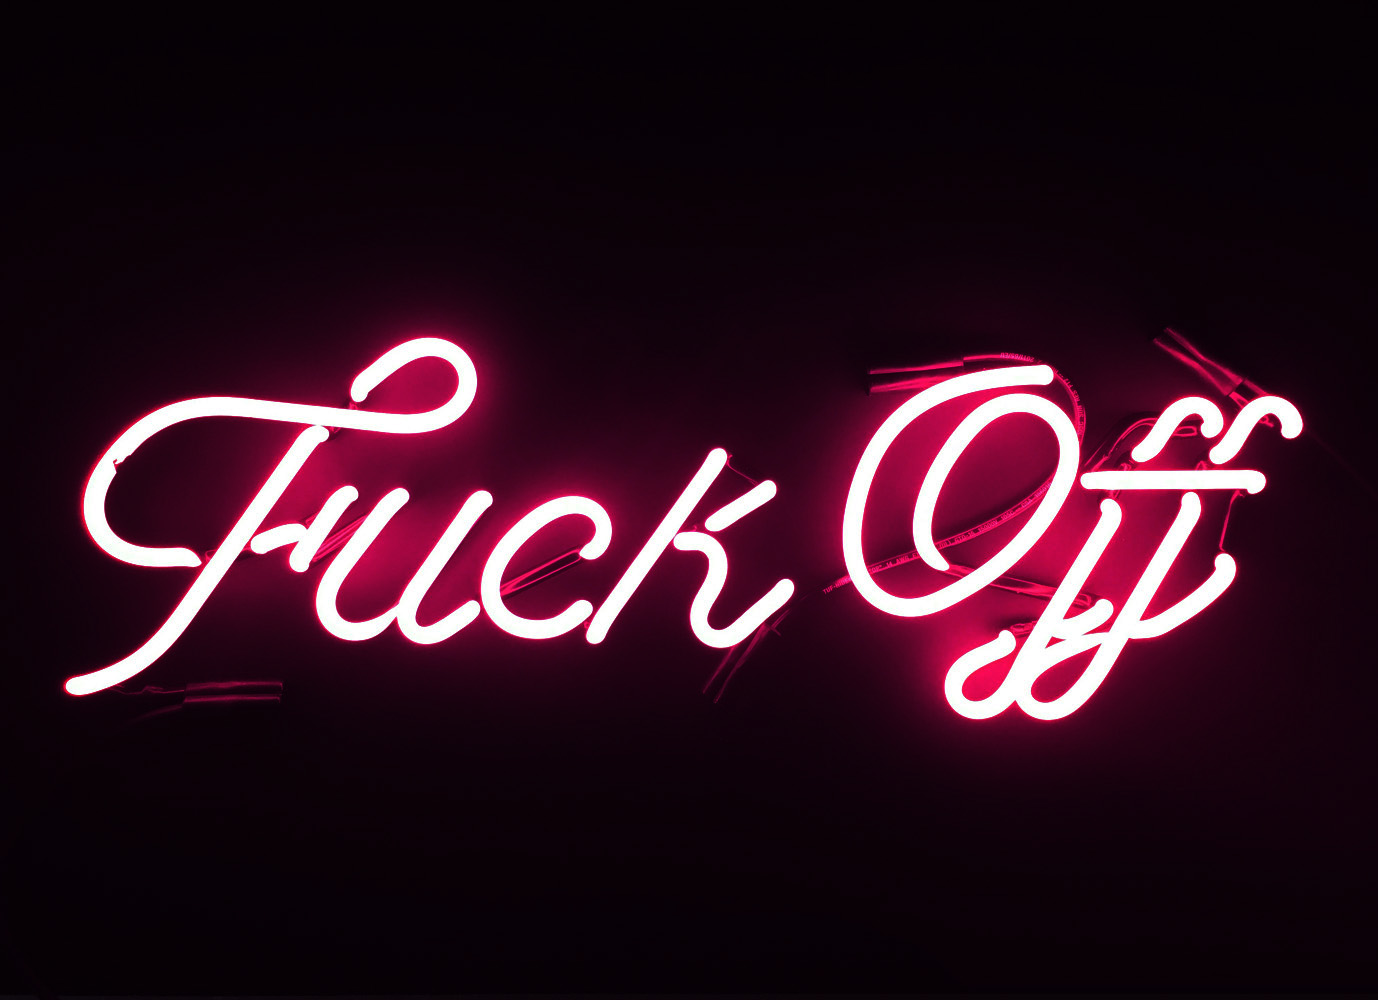 Indira-Cesarine-FUCK-OFF-pink-neon-THE-UNTITLED-SPACE-UPRISE-ANGRY-WOMEN-EXHIBIT-lowres-copy-2.jpg